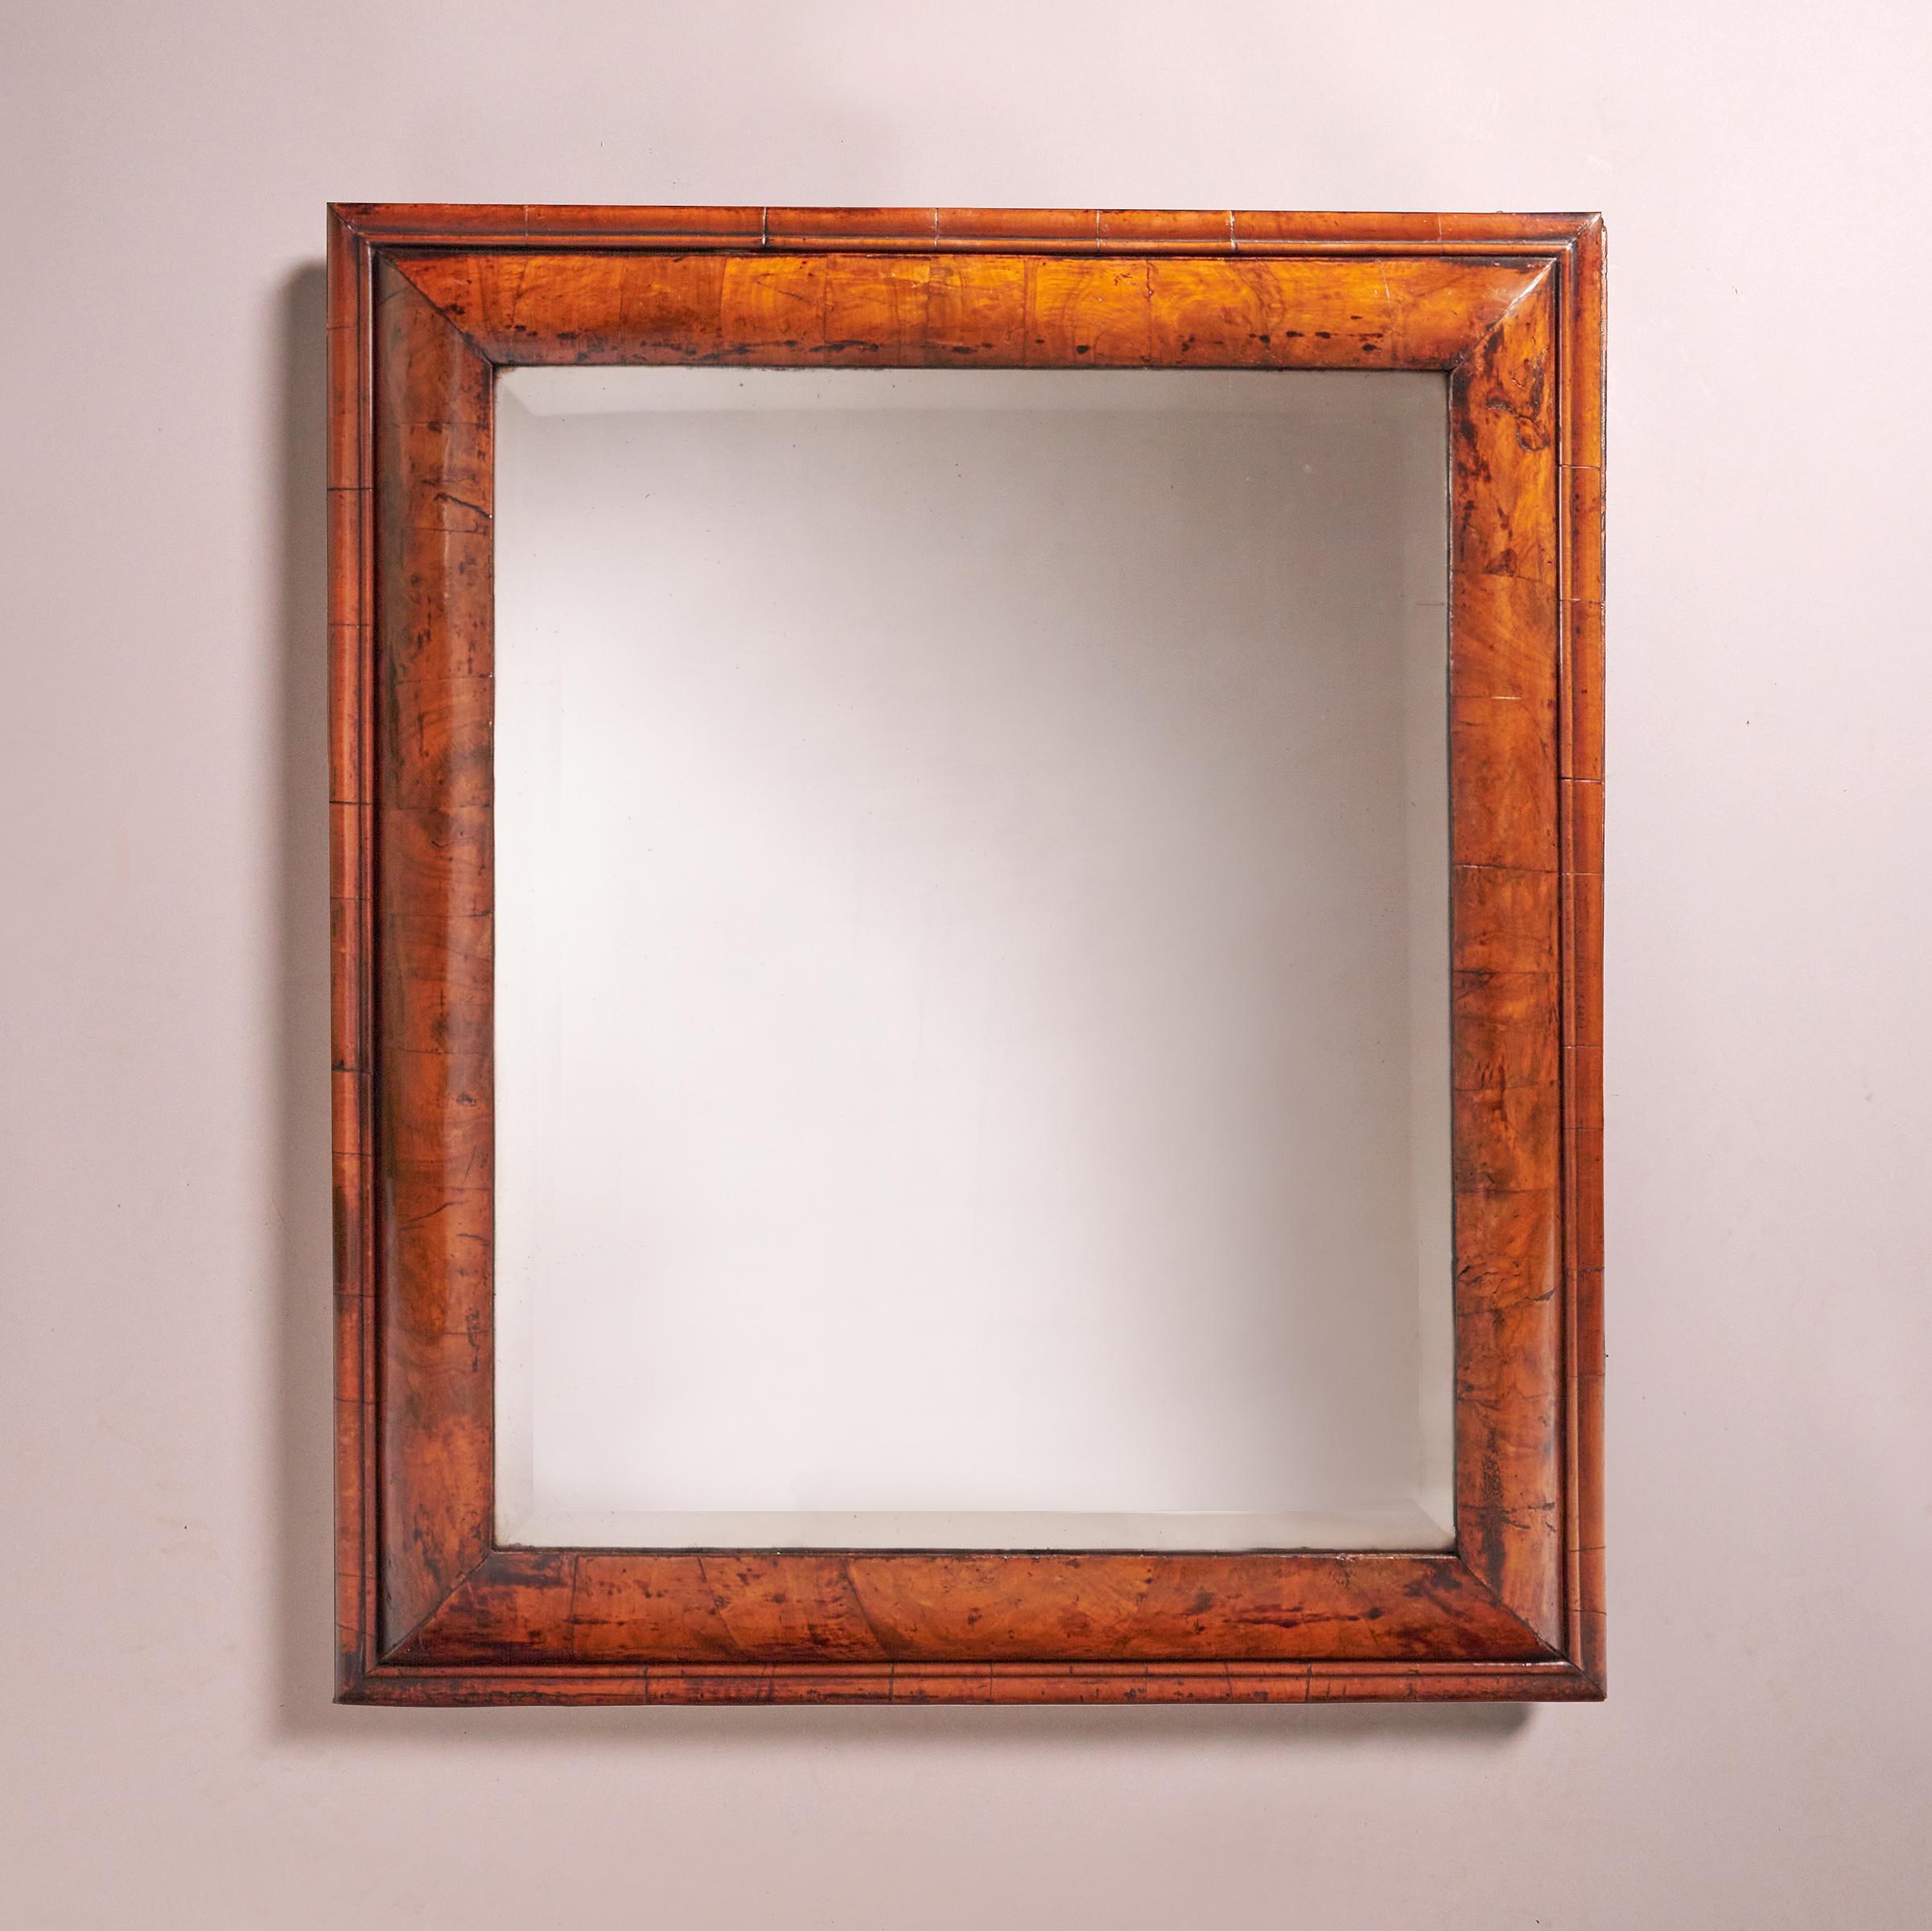 A large William and Mary 17th century figured walnut cushion mirror, circa 1680-1700.

The soft bevelled edge mirror plate is bordered by a pulvinated cushion frame decorated entirely in veneers of well-chosen sections of figured walnut, bordered